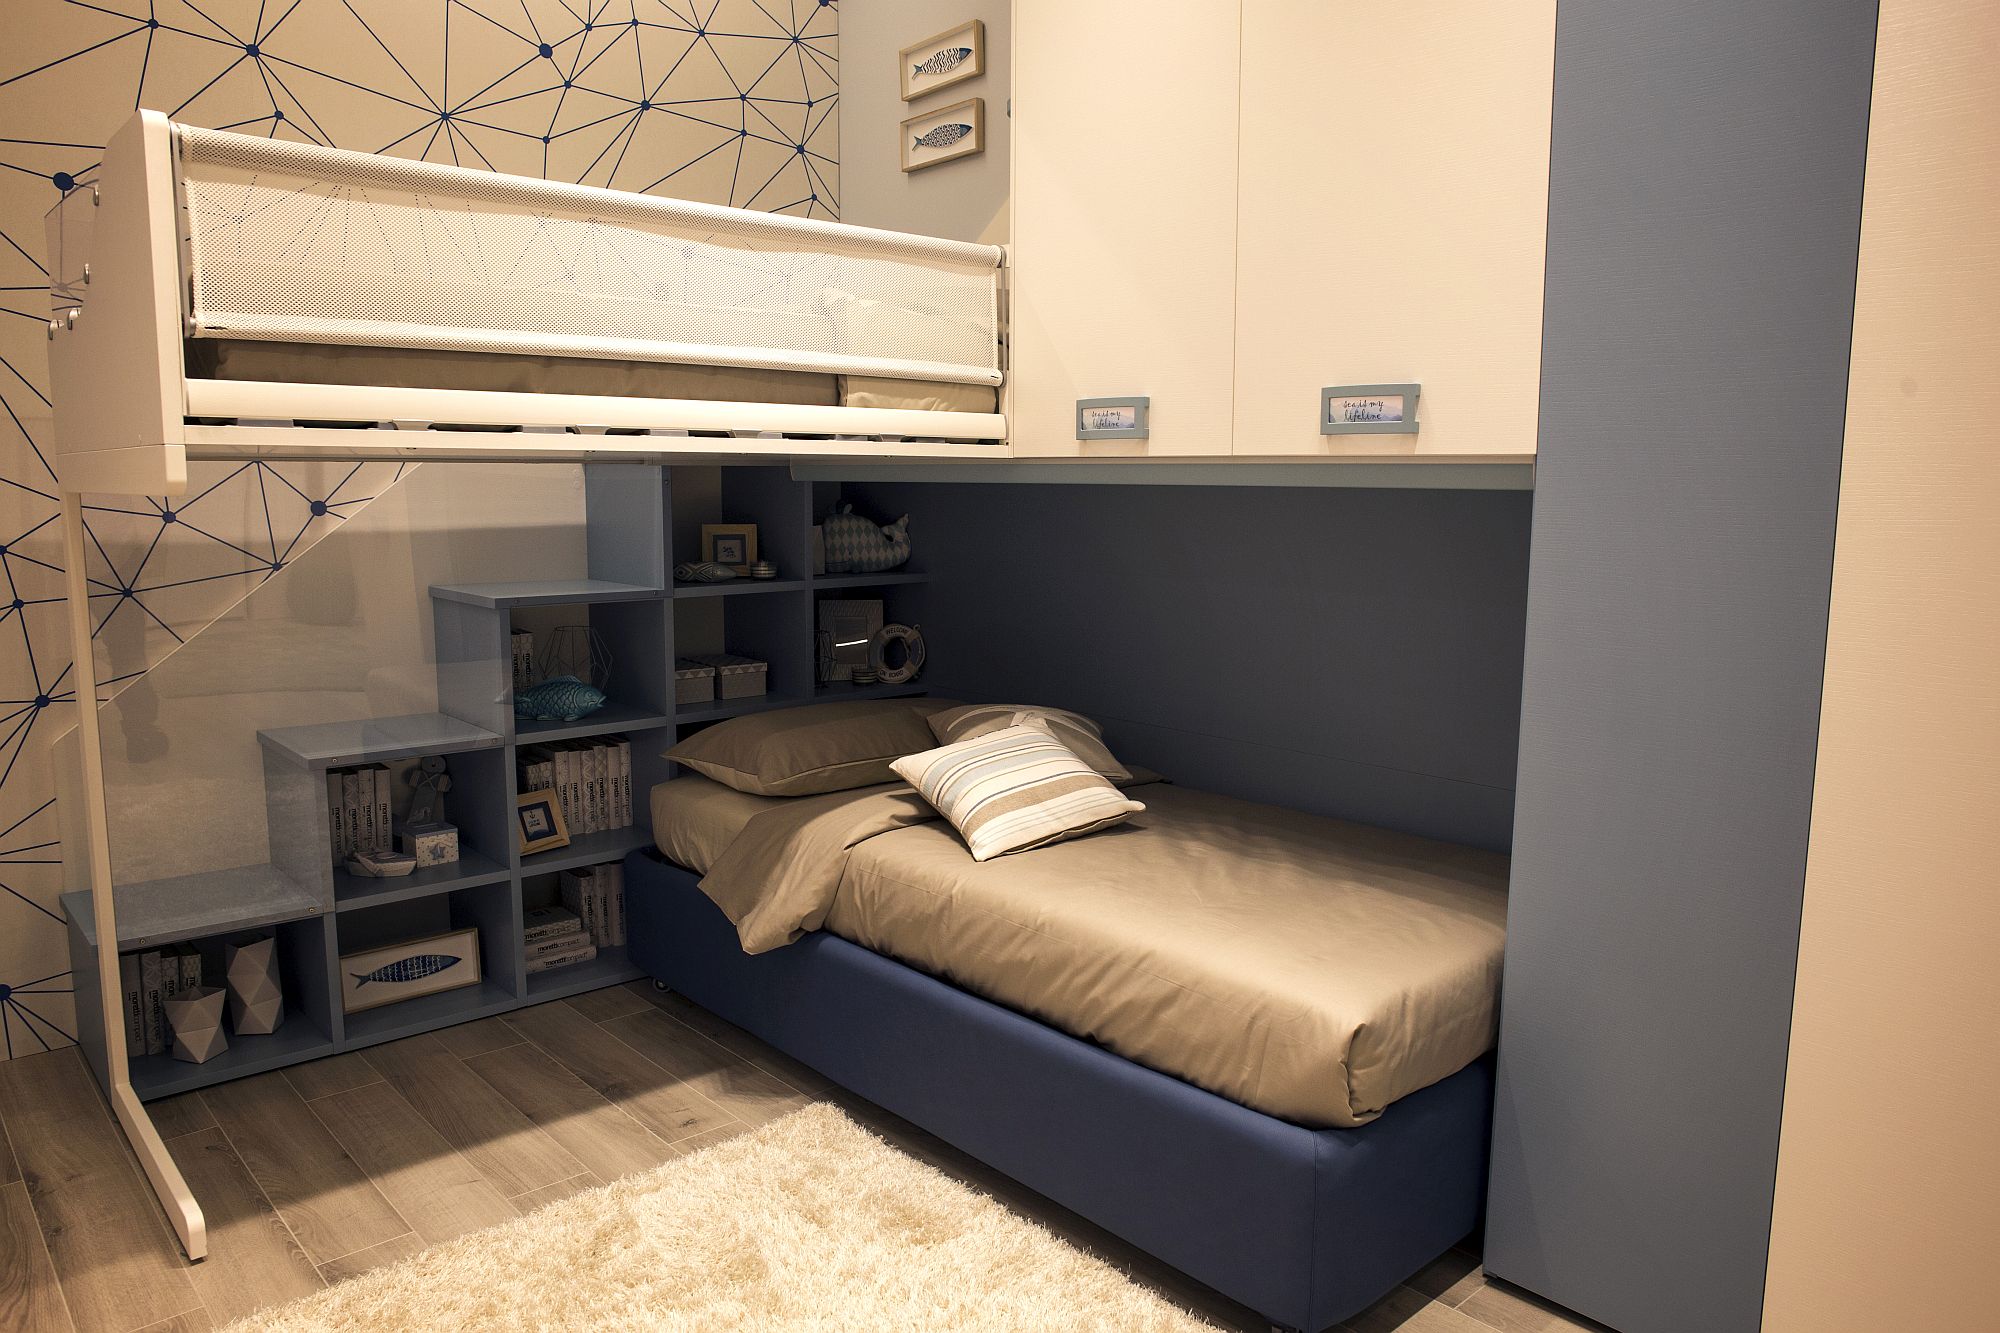 Bunk bed with steps that also offer storage space